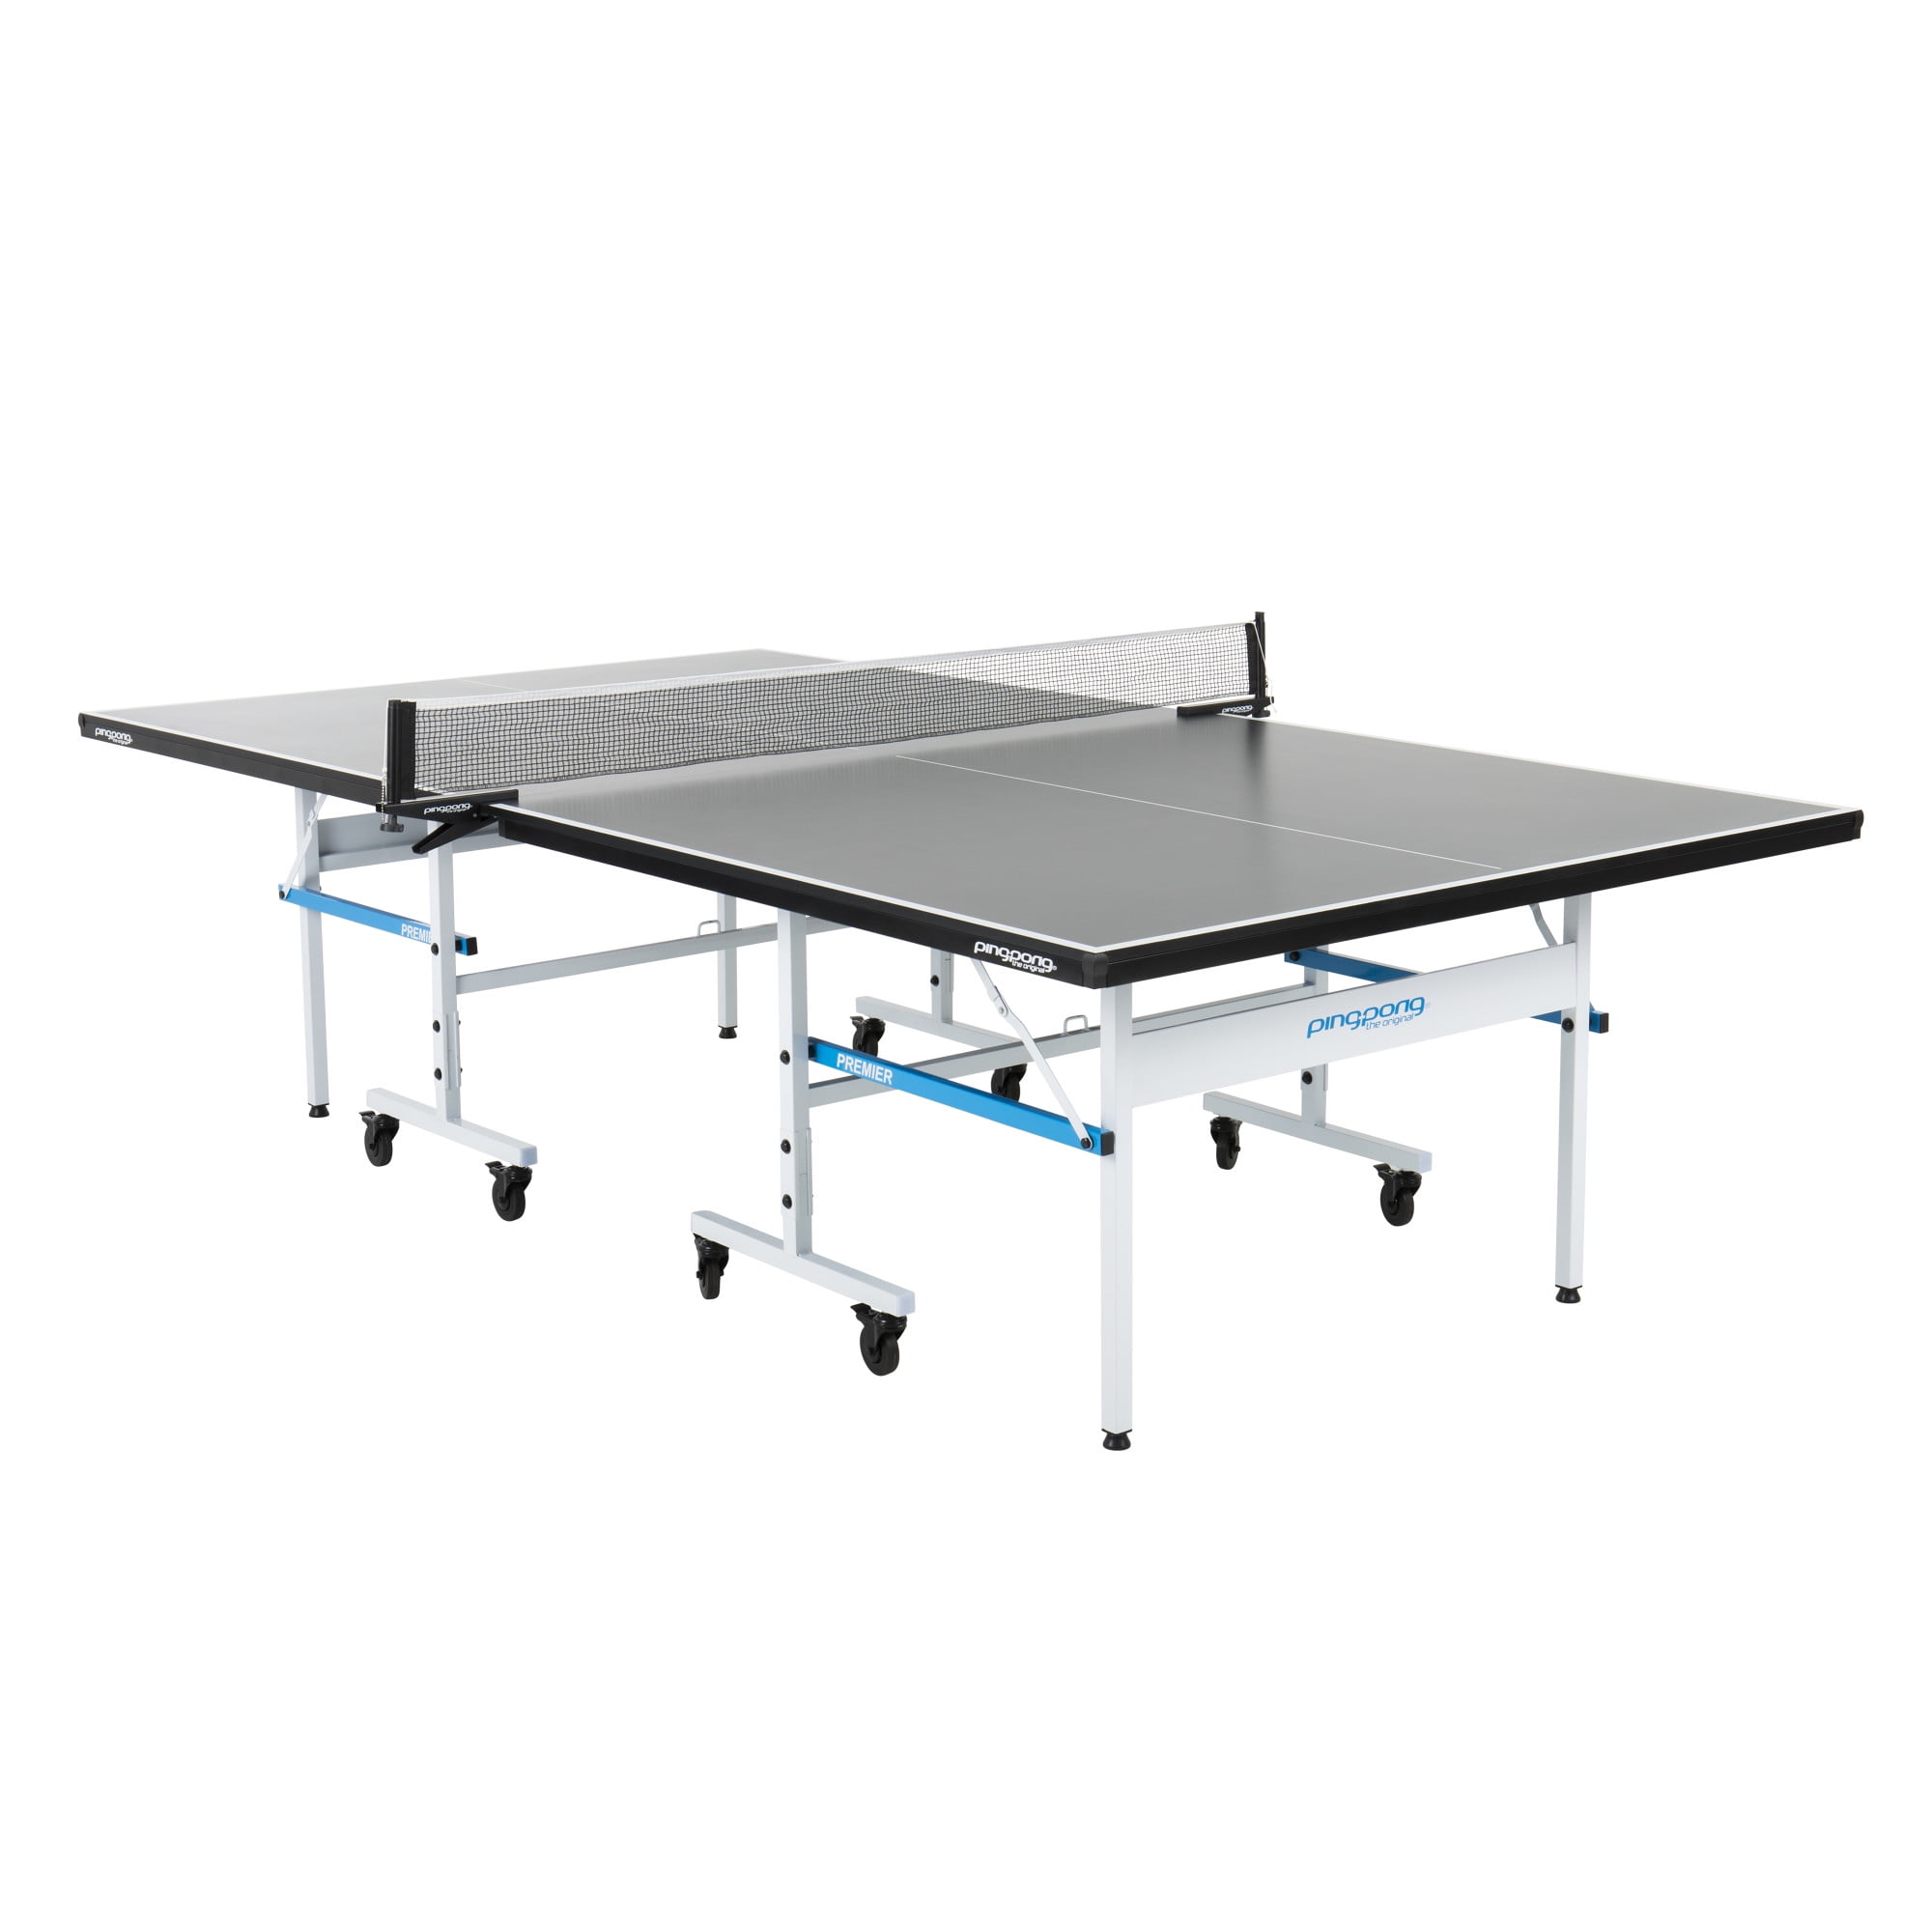 Weg huis Walter Cunningham Baars Ping Pong Premier Table Tennis Table - 95% Preassembled for Quick and Easy  Setup - Walmart.com